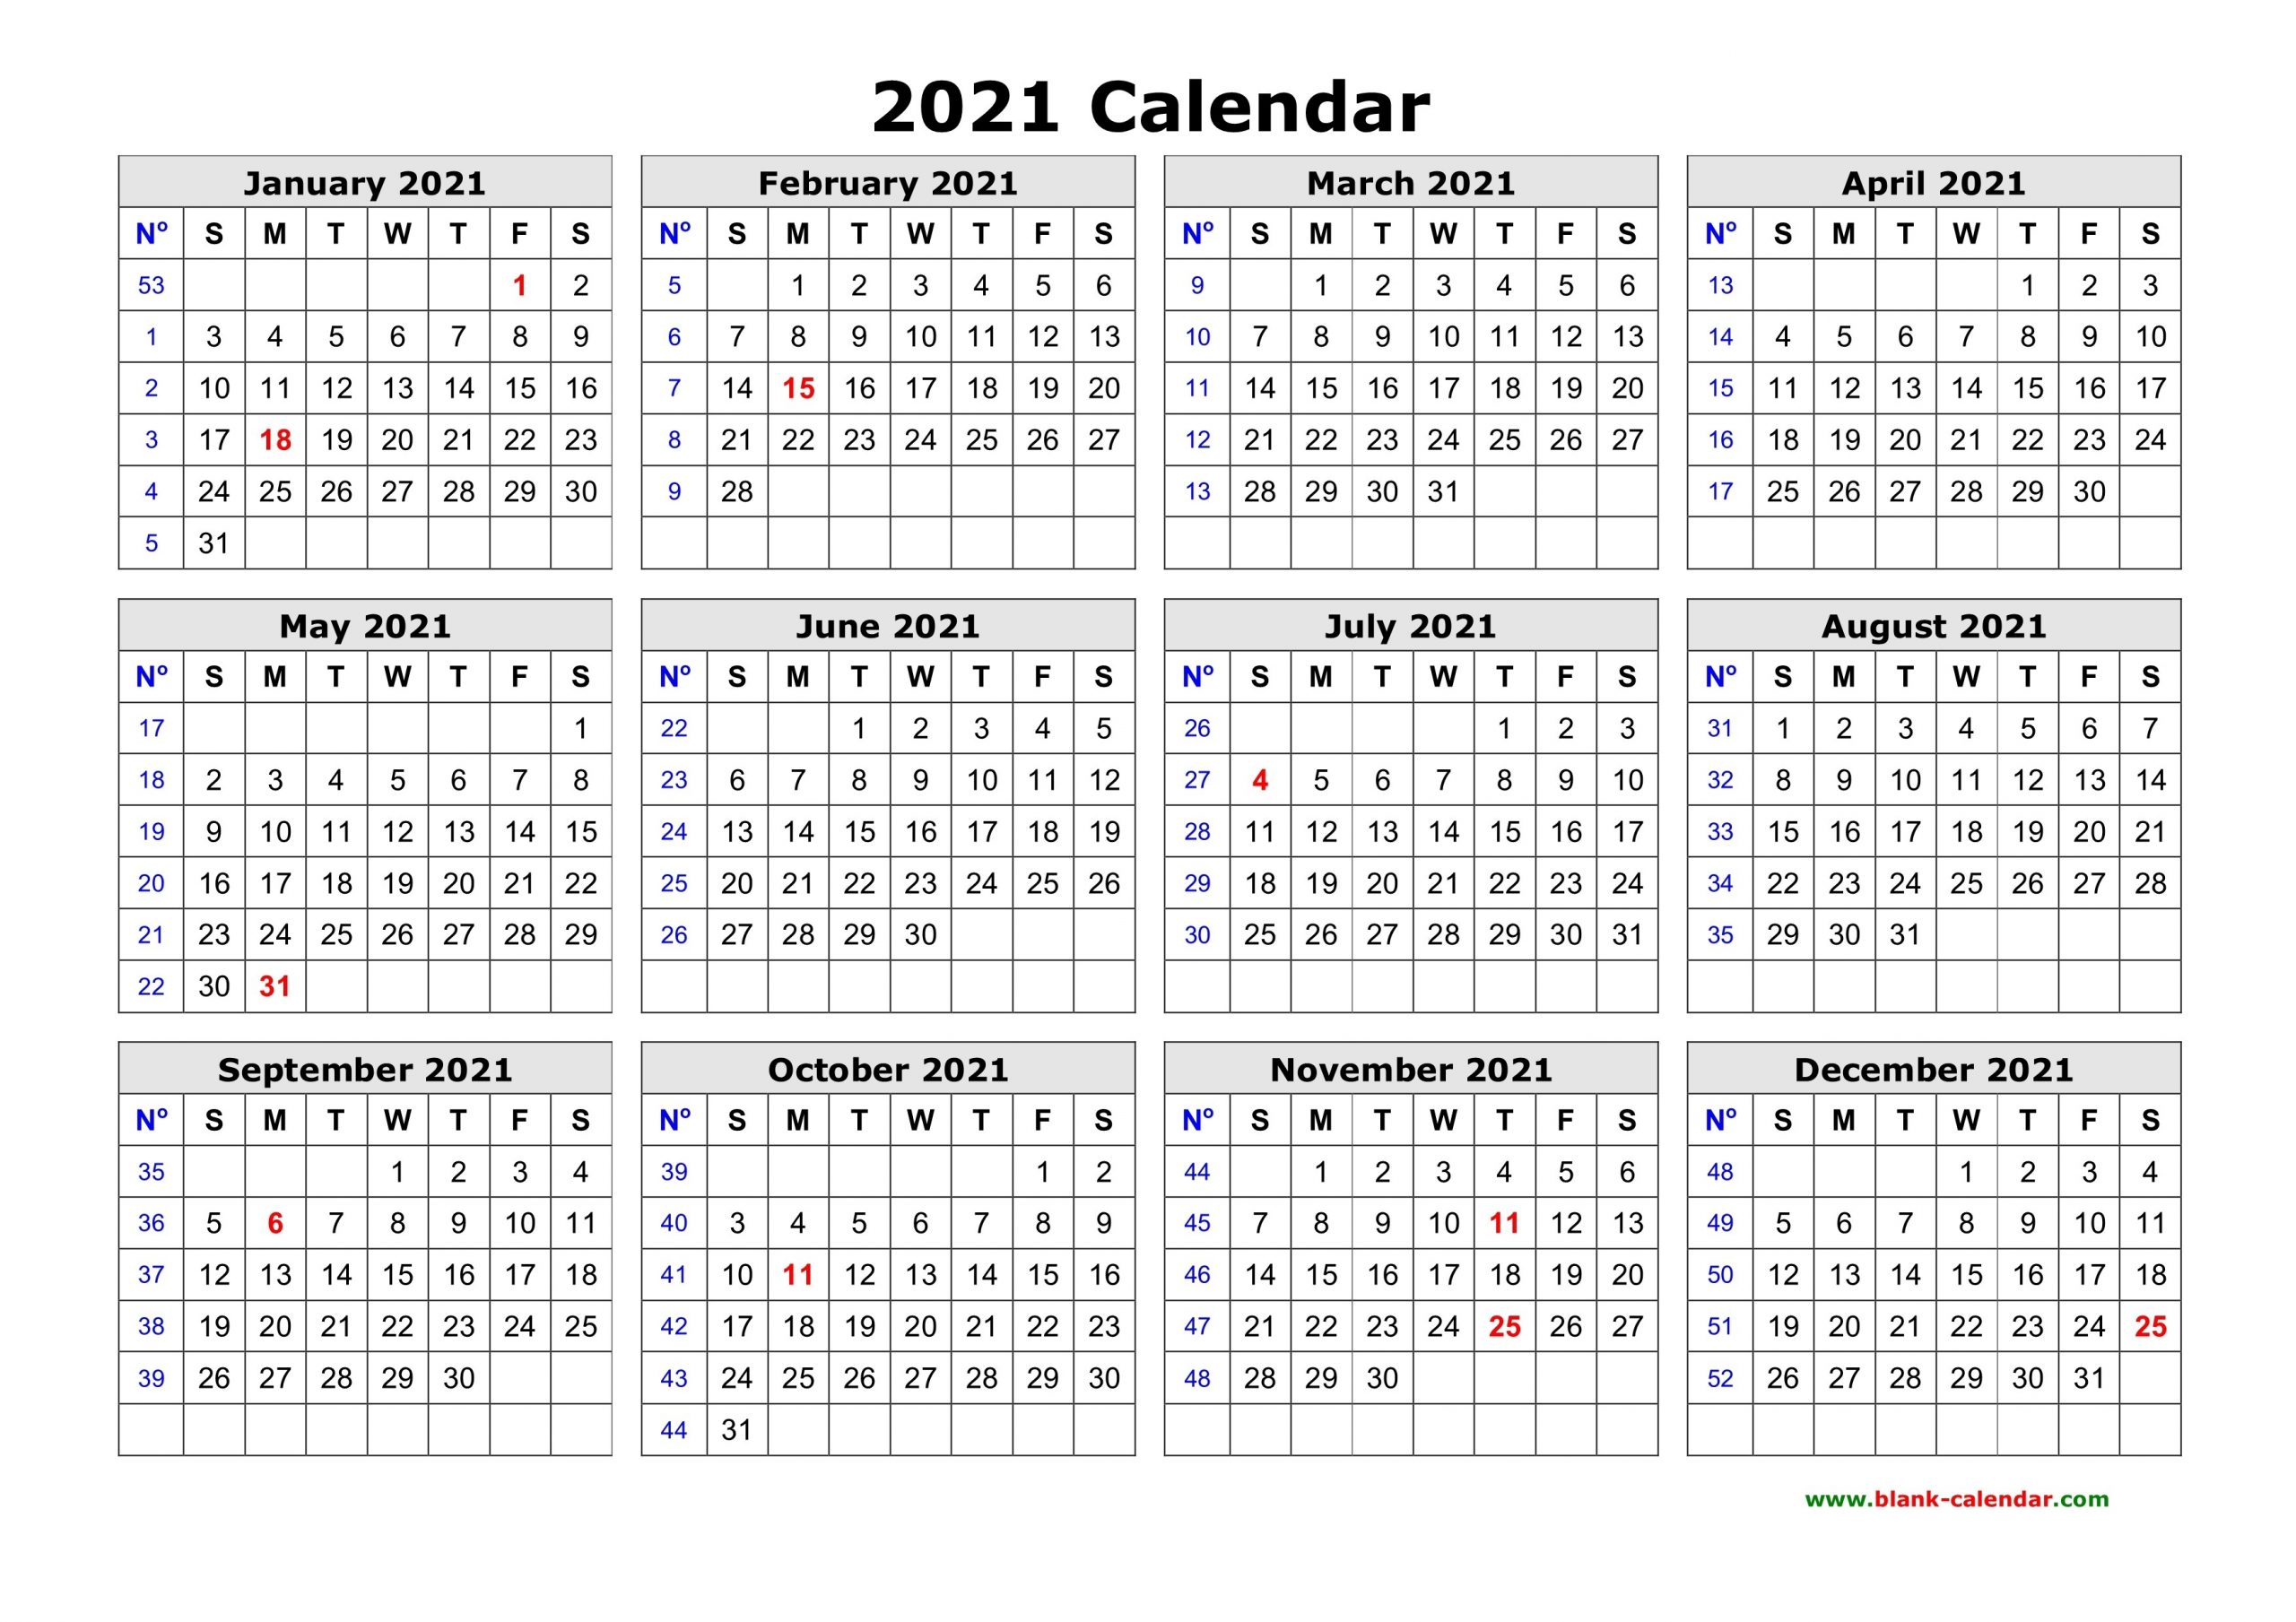 Free Download Printable Calendar 2021 In One Page, Clean Design.-2021 Annual Calendar Printable Free